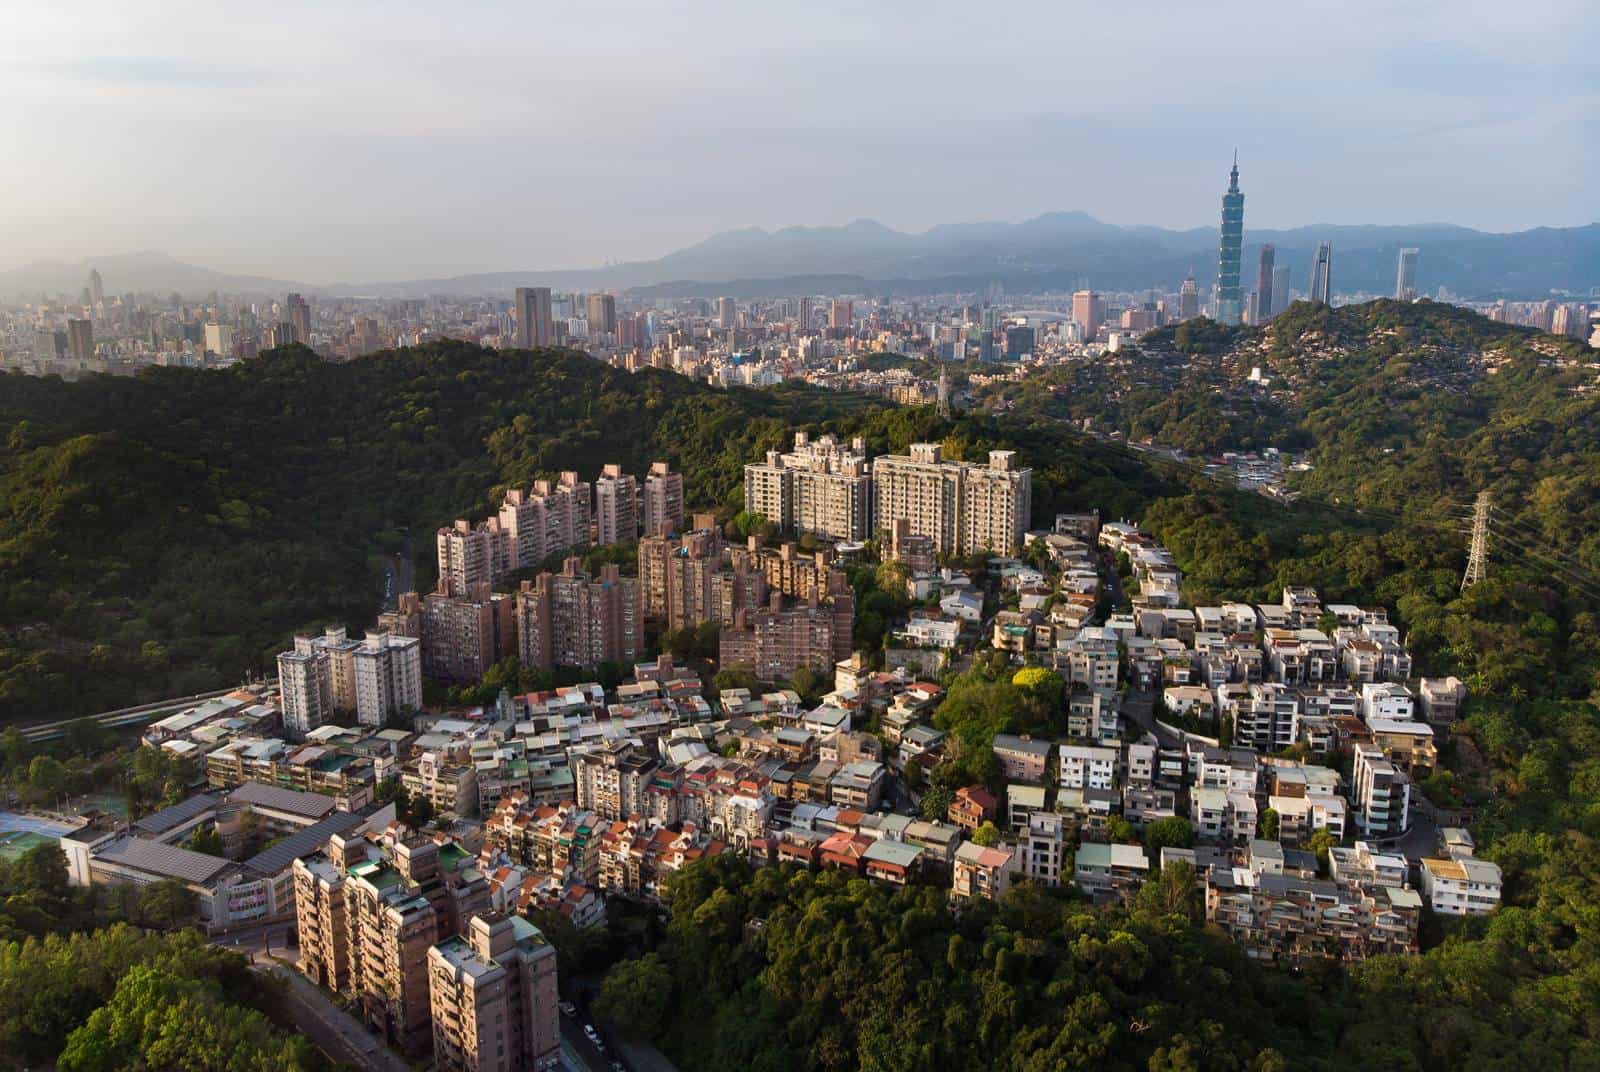 Who can afford to live in Taipei?